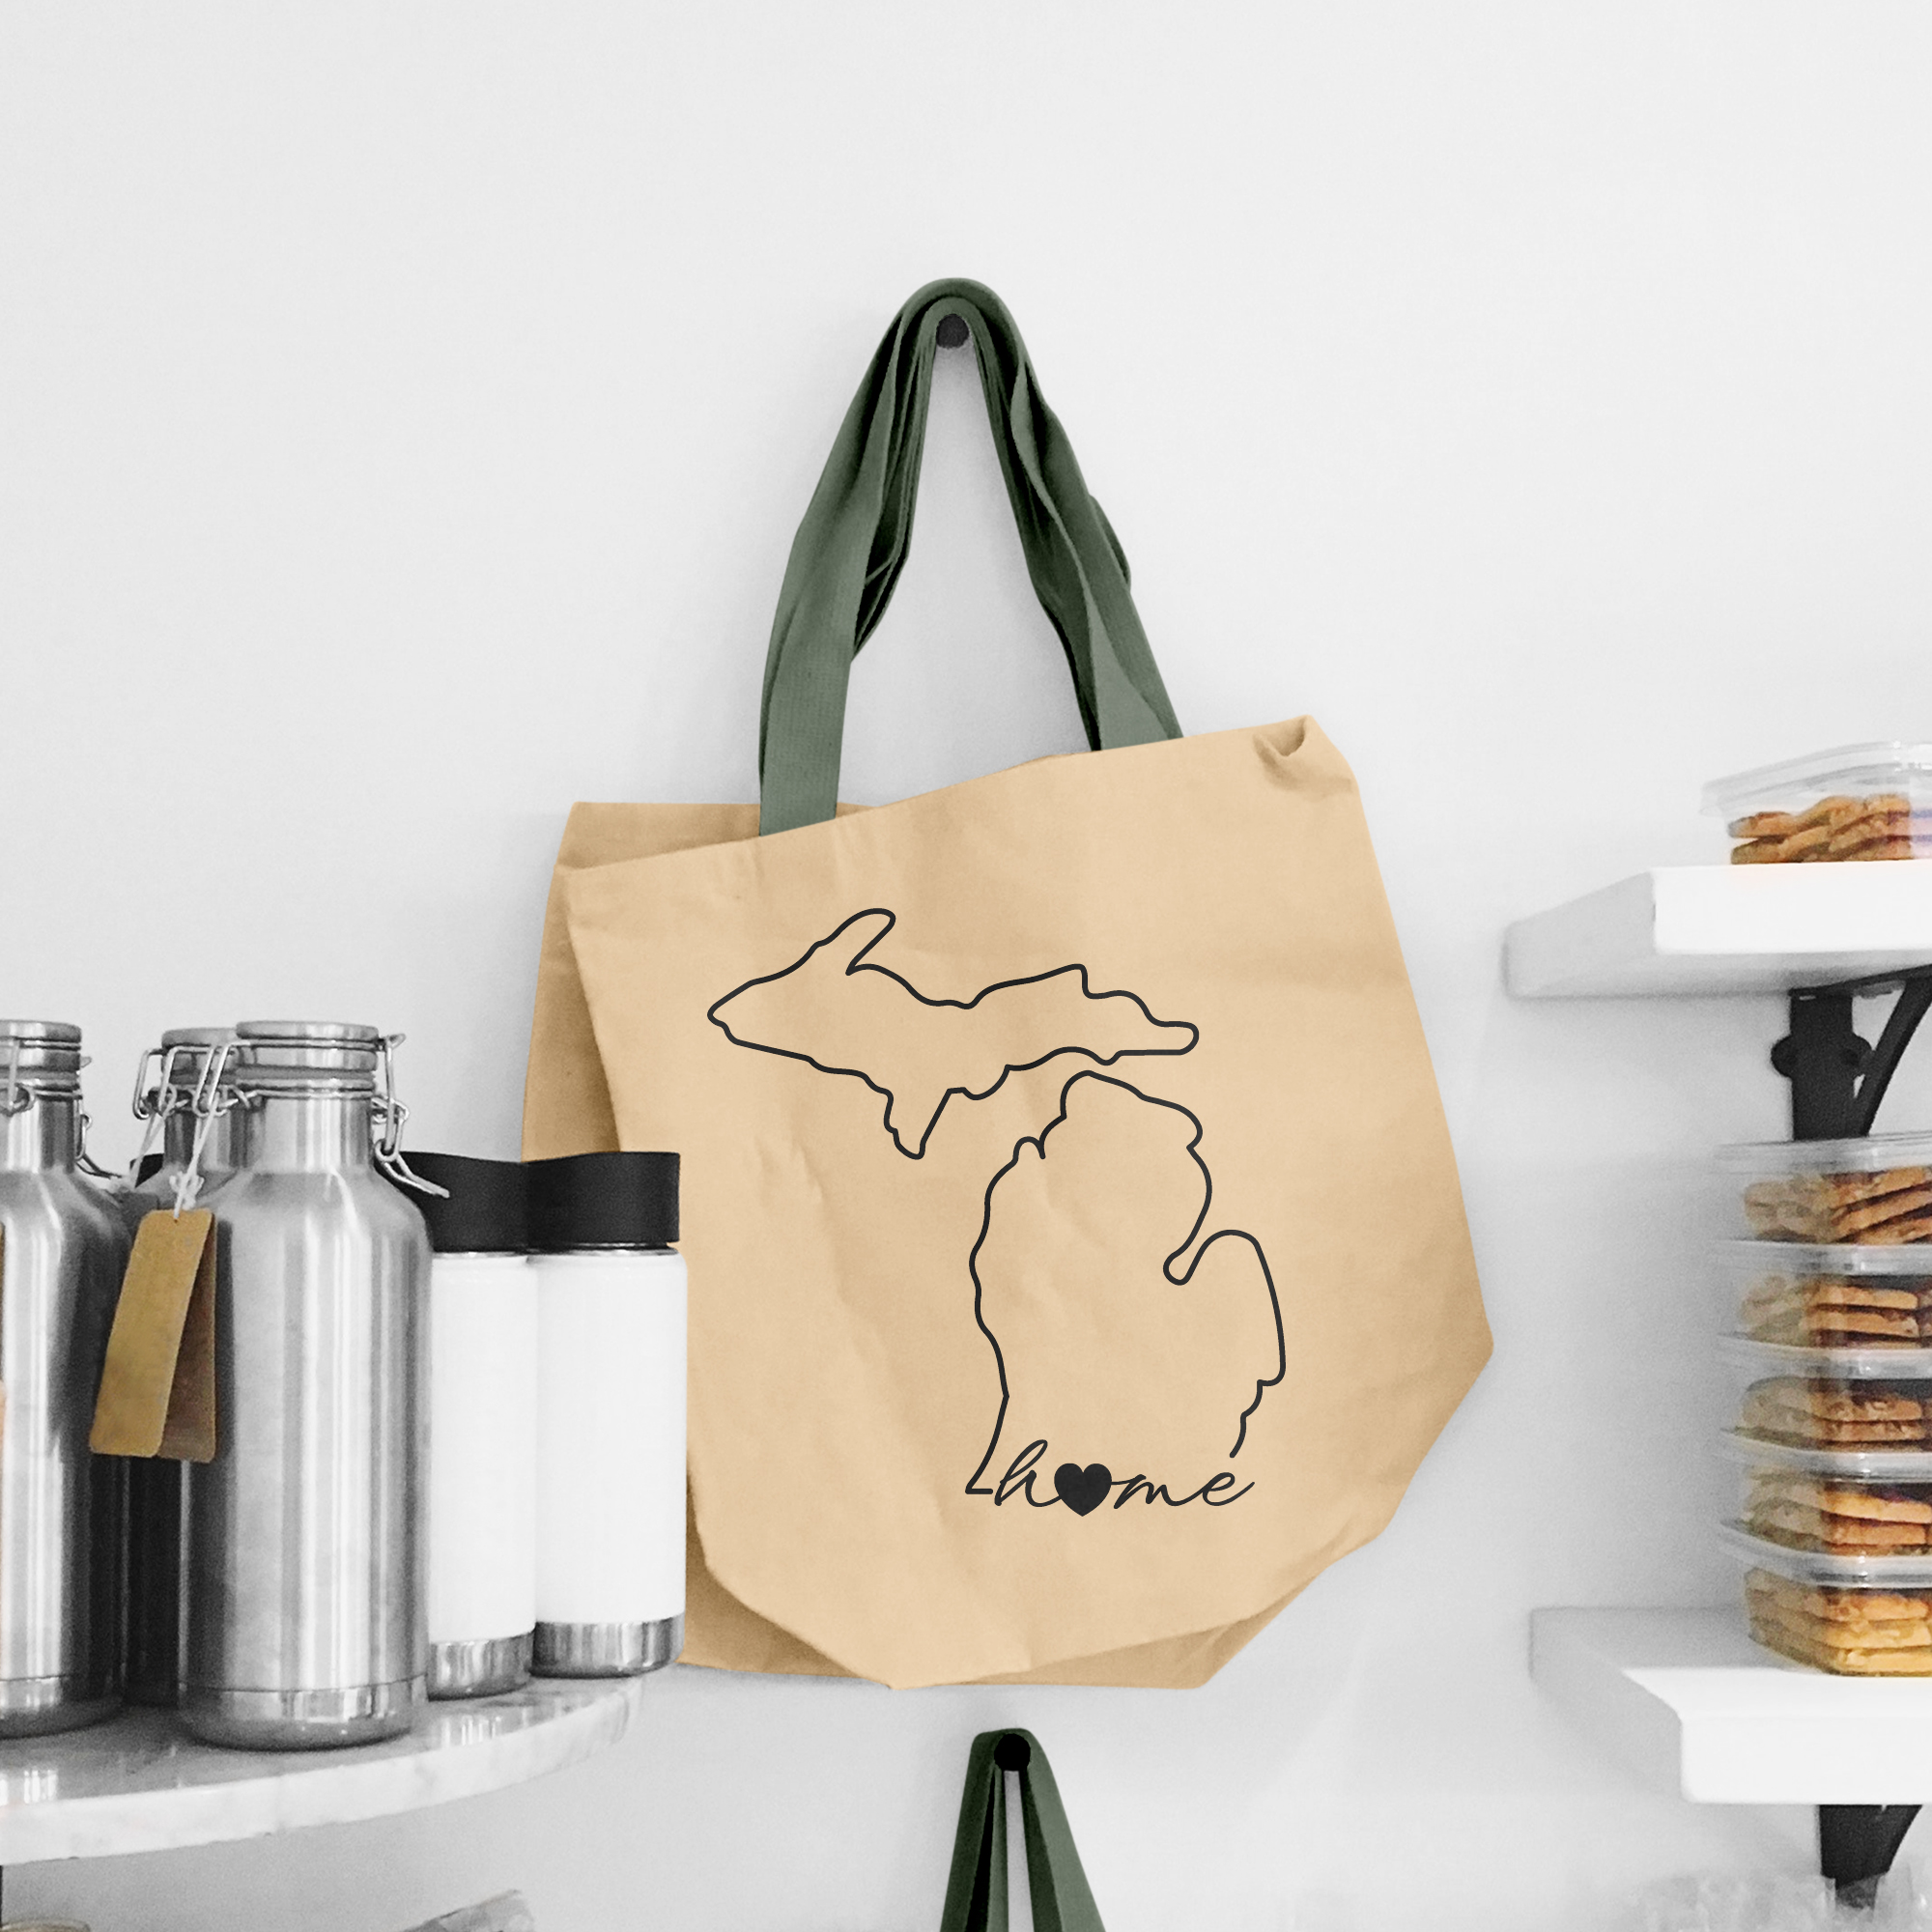 Black illustration of map of Michigan on the beige shopping bag with dirty green handle.